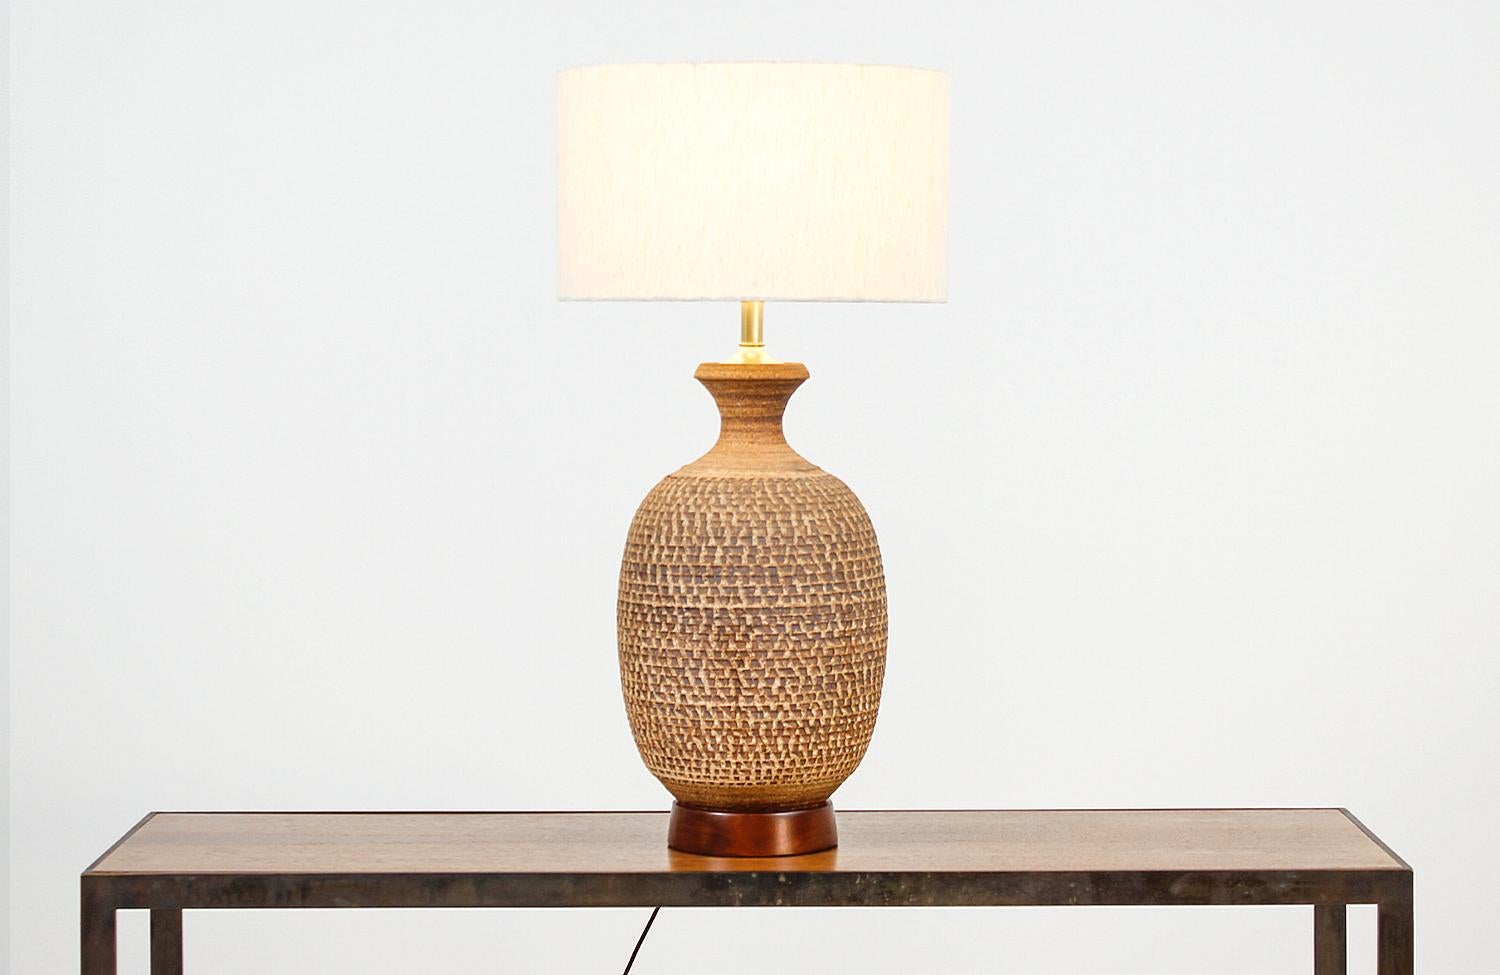 “Z-Series” ceramic table lamp designed by Bob Kinzie for Affiliated Craftsmen in the United States, circa 1960s. This large modern design features a rounded ceramic body with a beautiful textured pattern. It sits on a newly refinished walnut wood